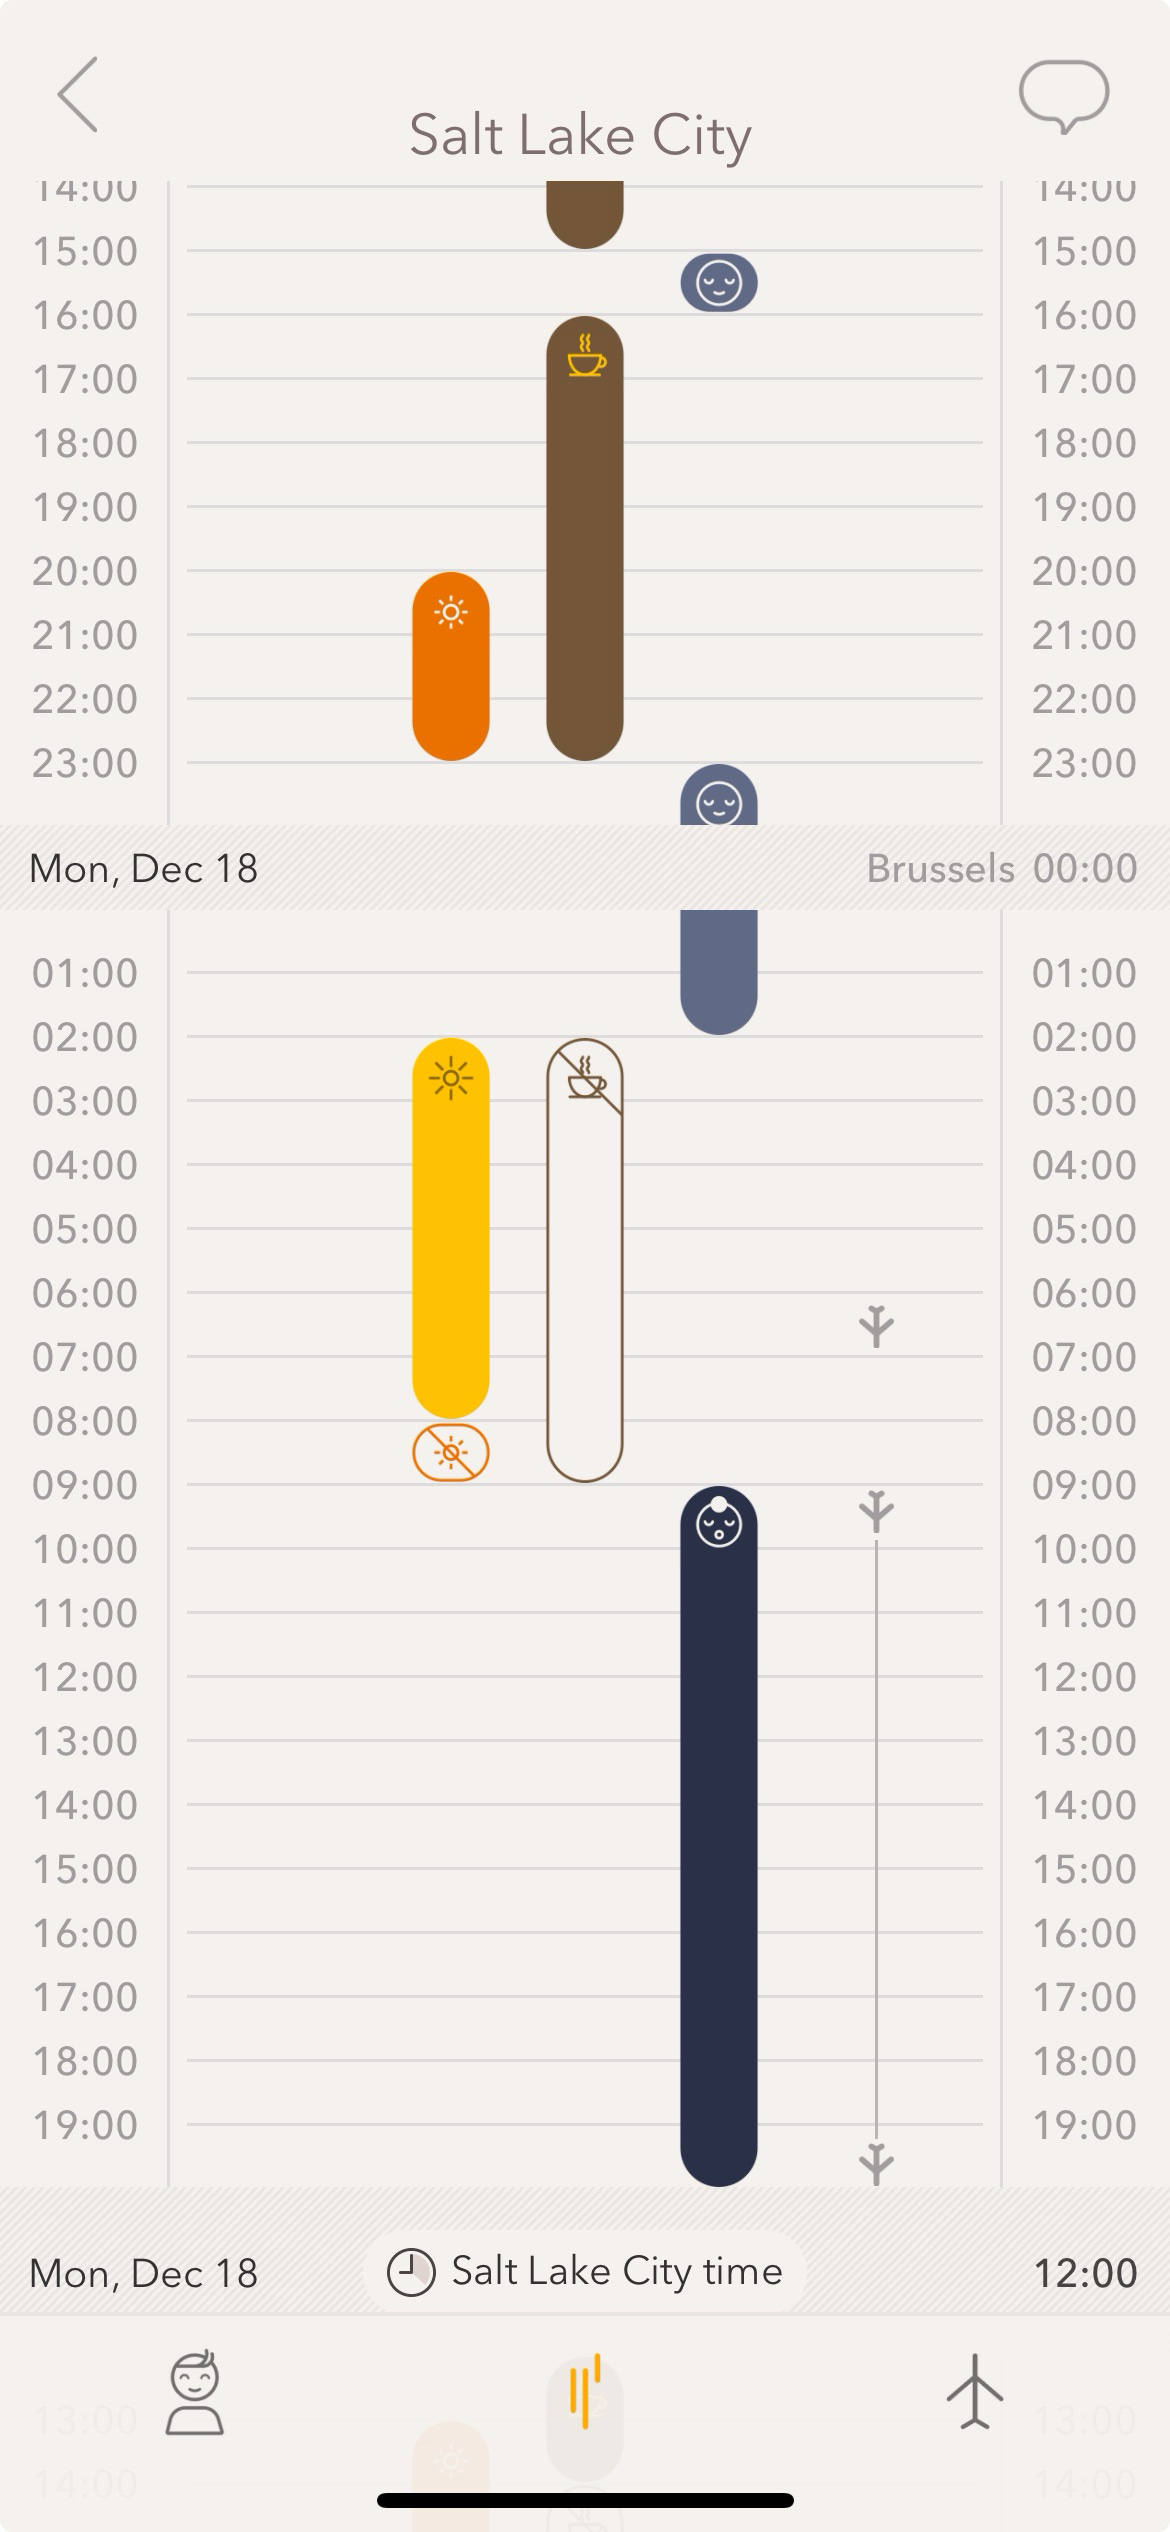 A screenshot of the Timeshifter app featuring a sleek, modern design with instructions on when to sleep, drink caffeine, and be exposed to light. Central is a recommendation for a three-hour nap from 11pm to 2am the day before the flight.